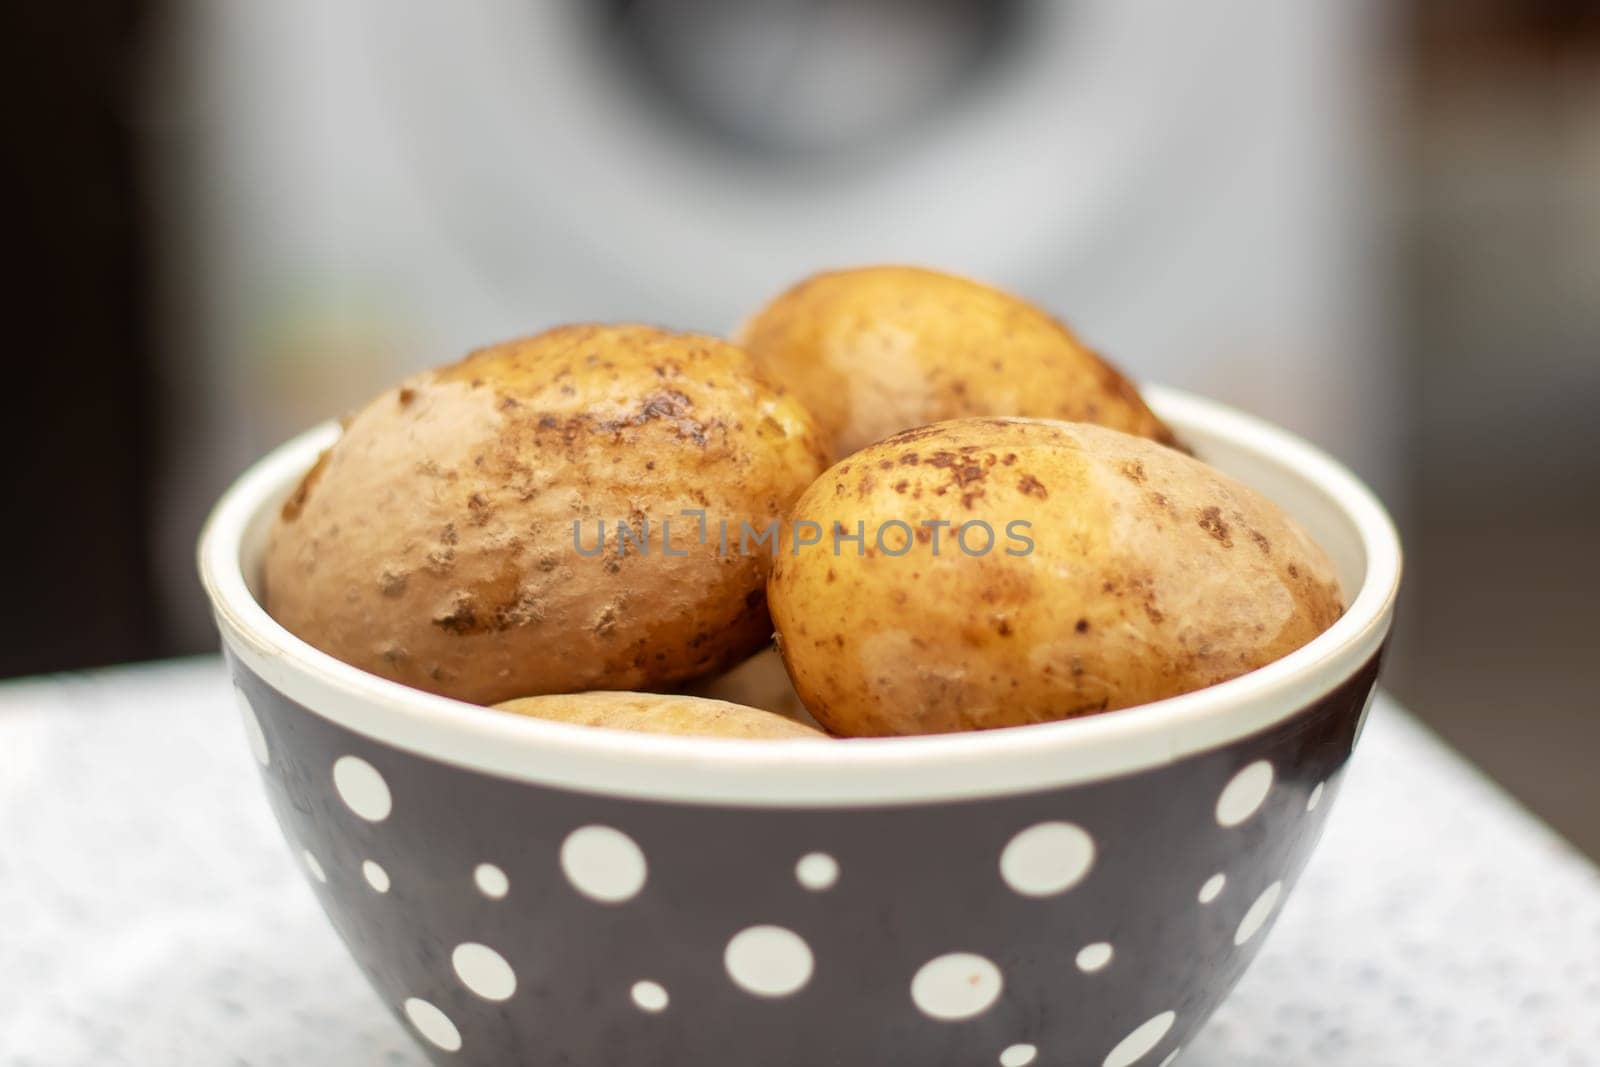 Potatoes, a staple food, are being cooked in a pan with water. These root vegetables are a natural food ingredient used in various cuisines